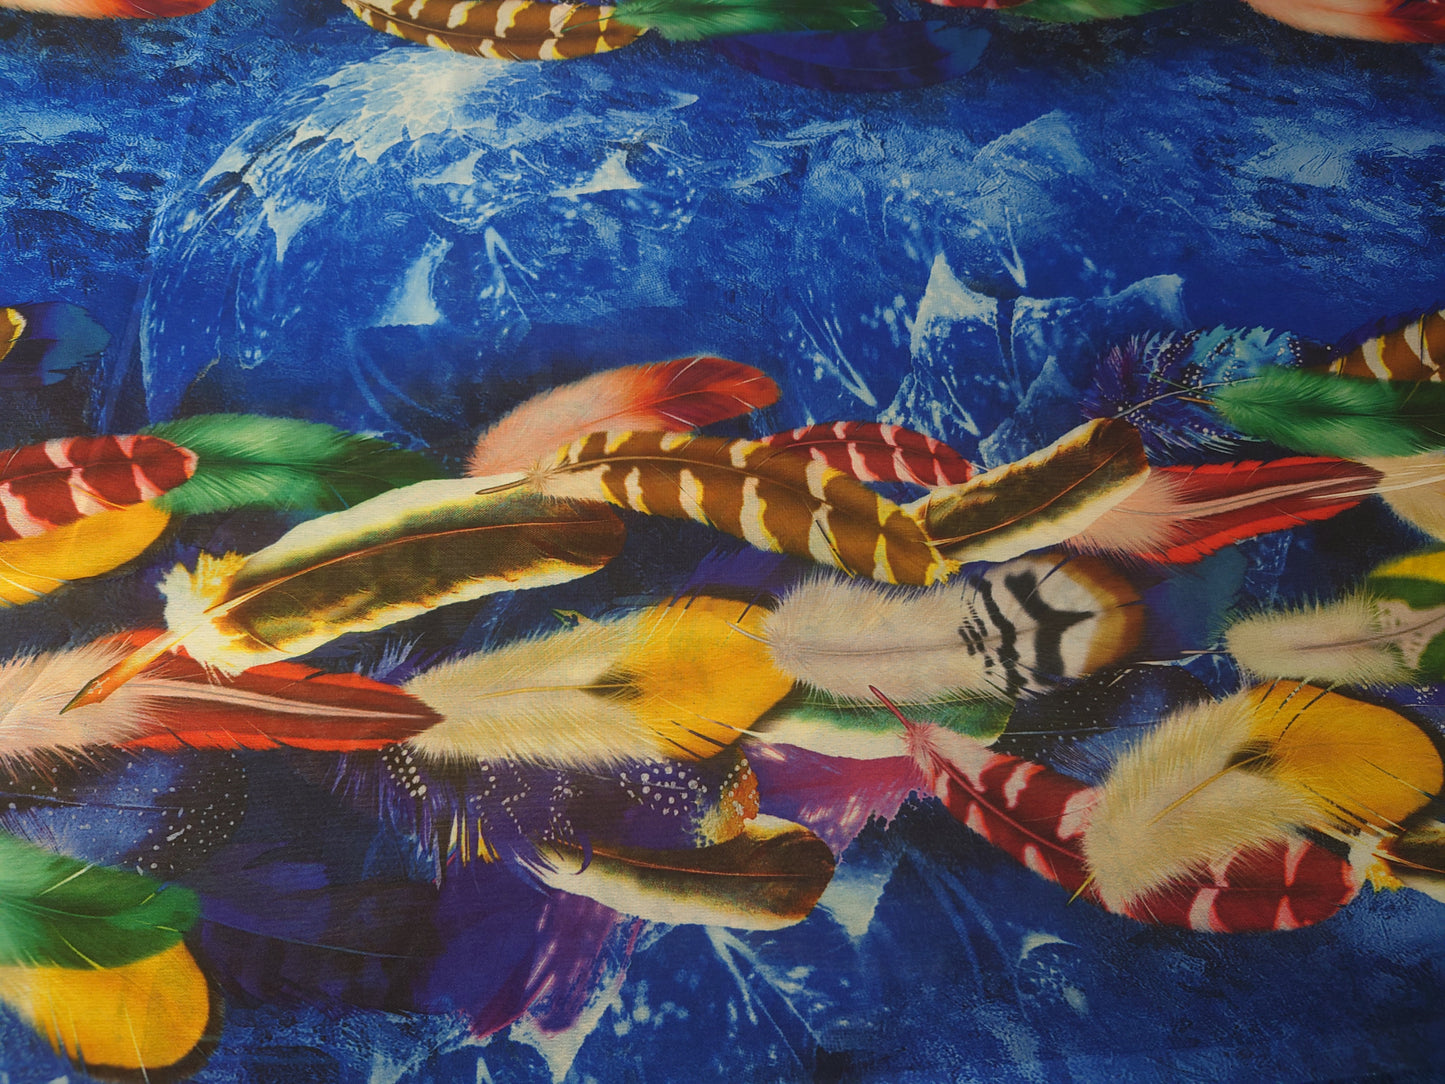 Multicoloured feathers on a blue background

Crepe de chine 